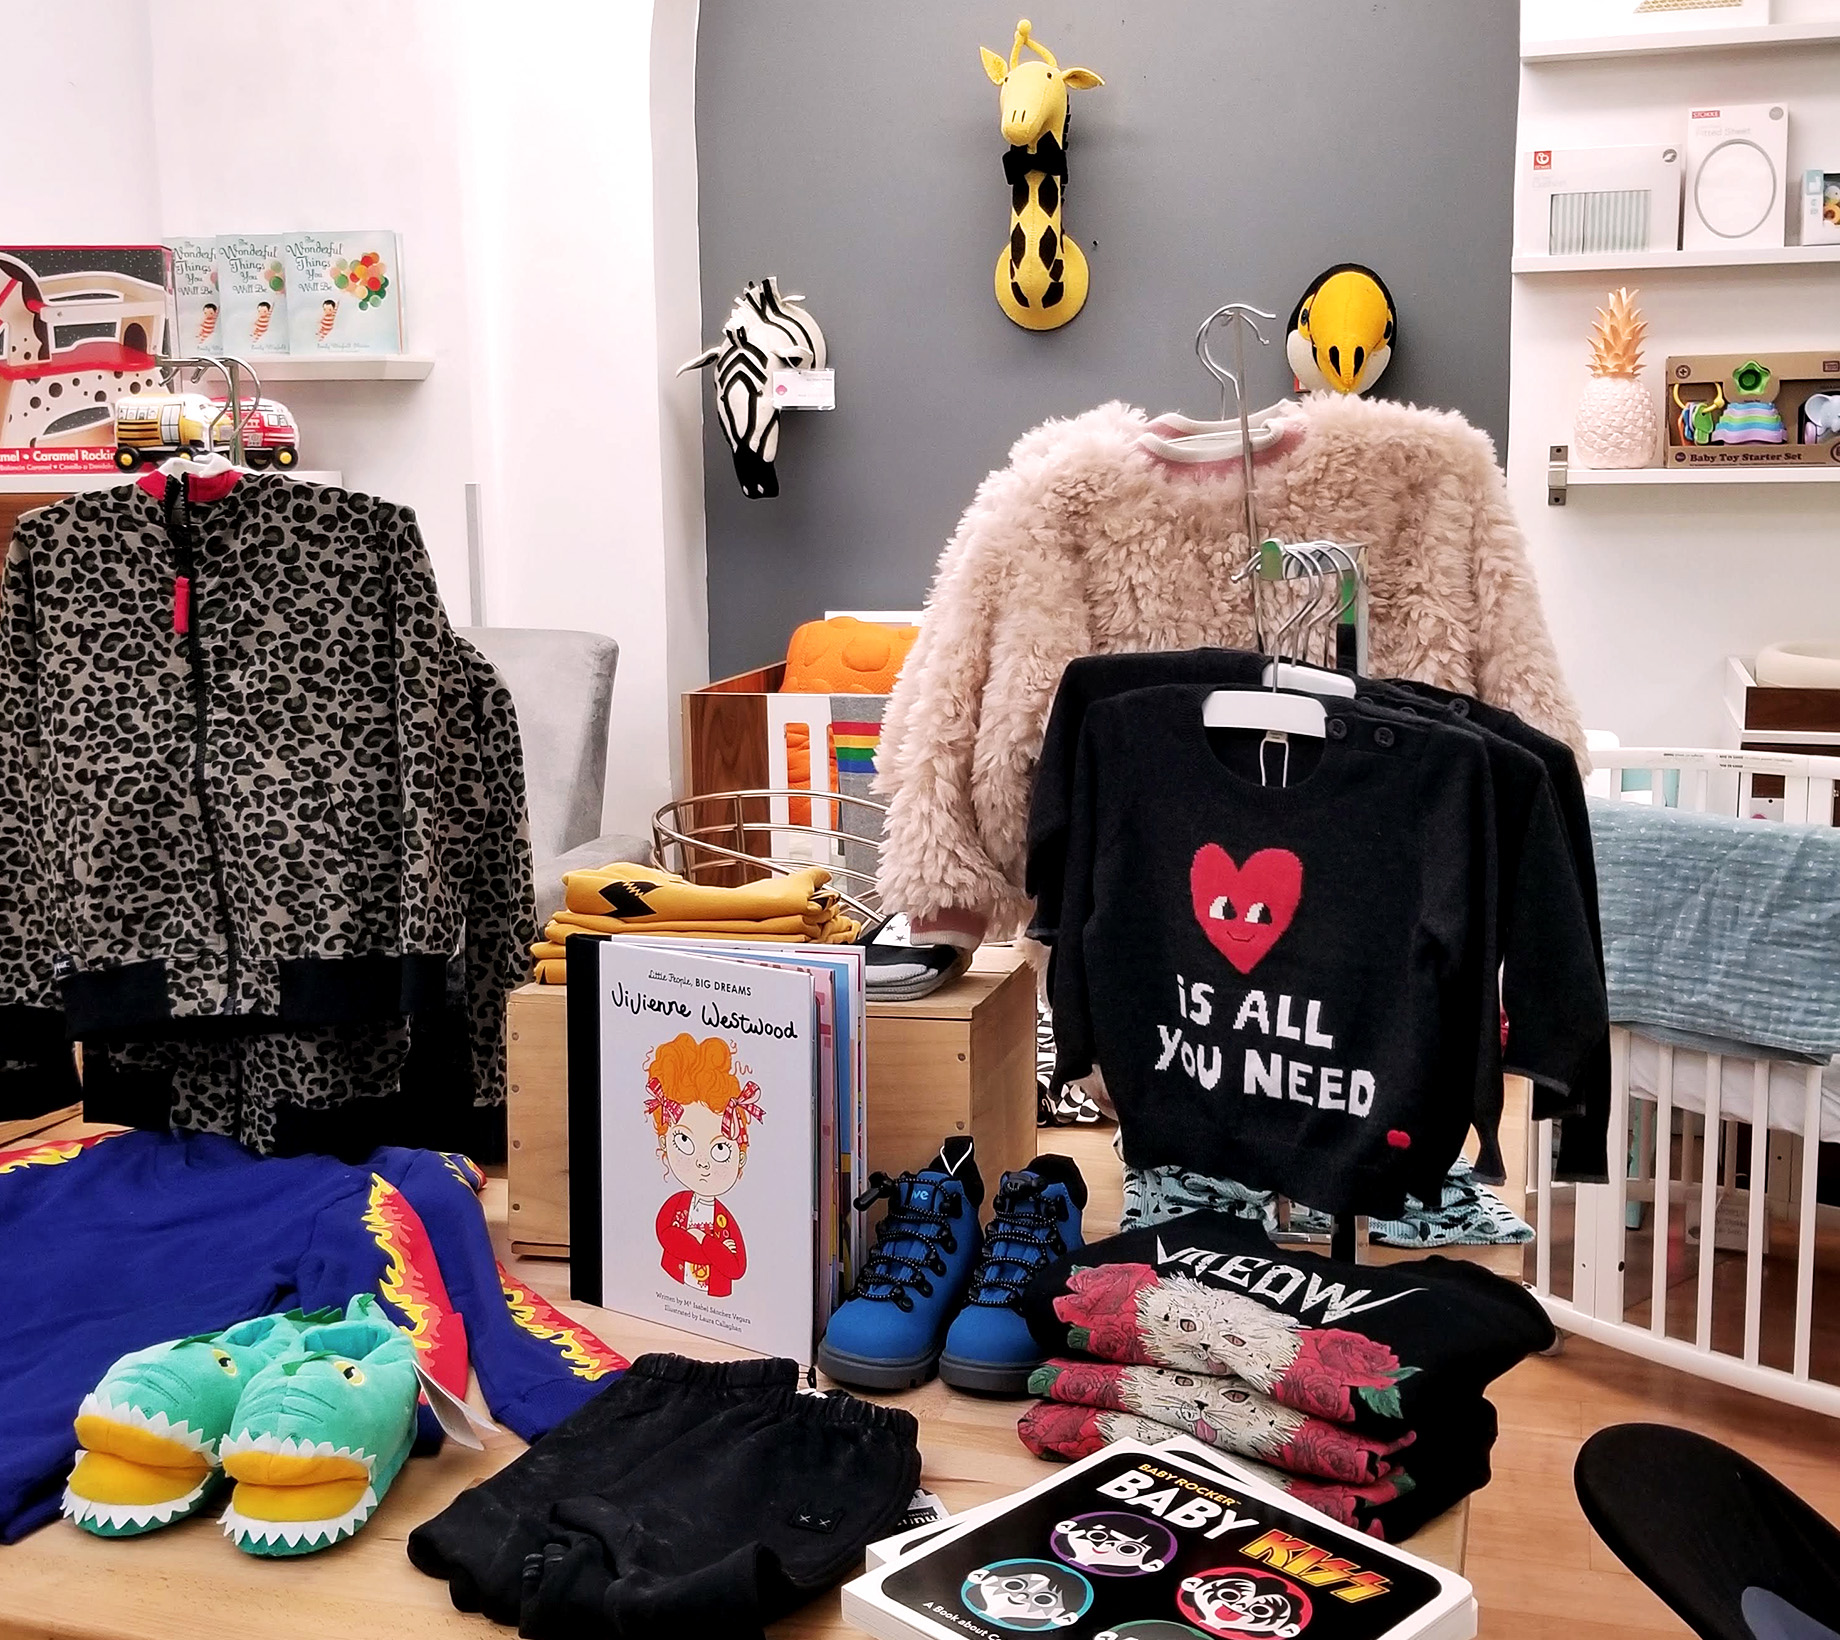 From Baby To Toddler Years, Babesta Is Your One-Stop Shop